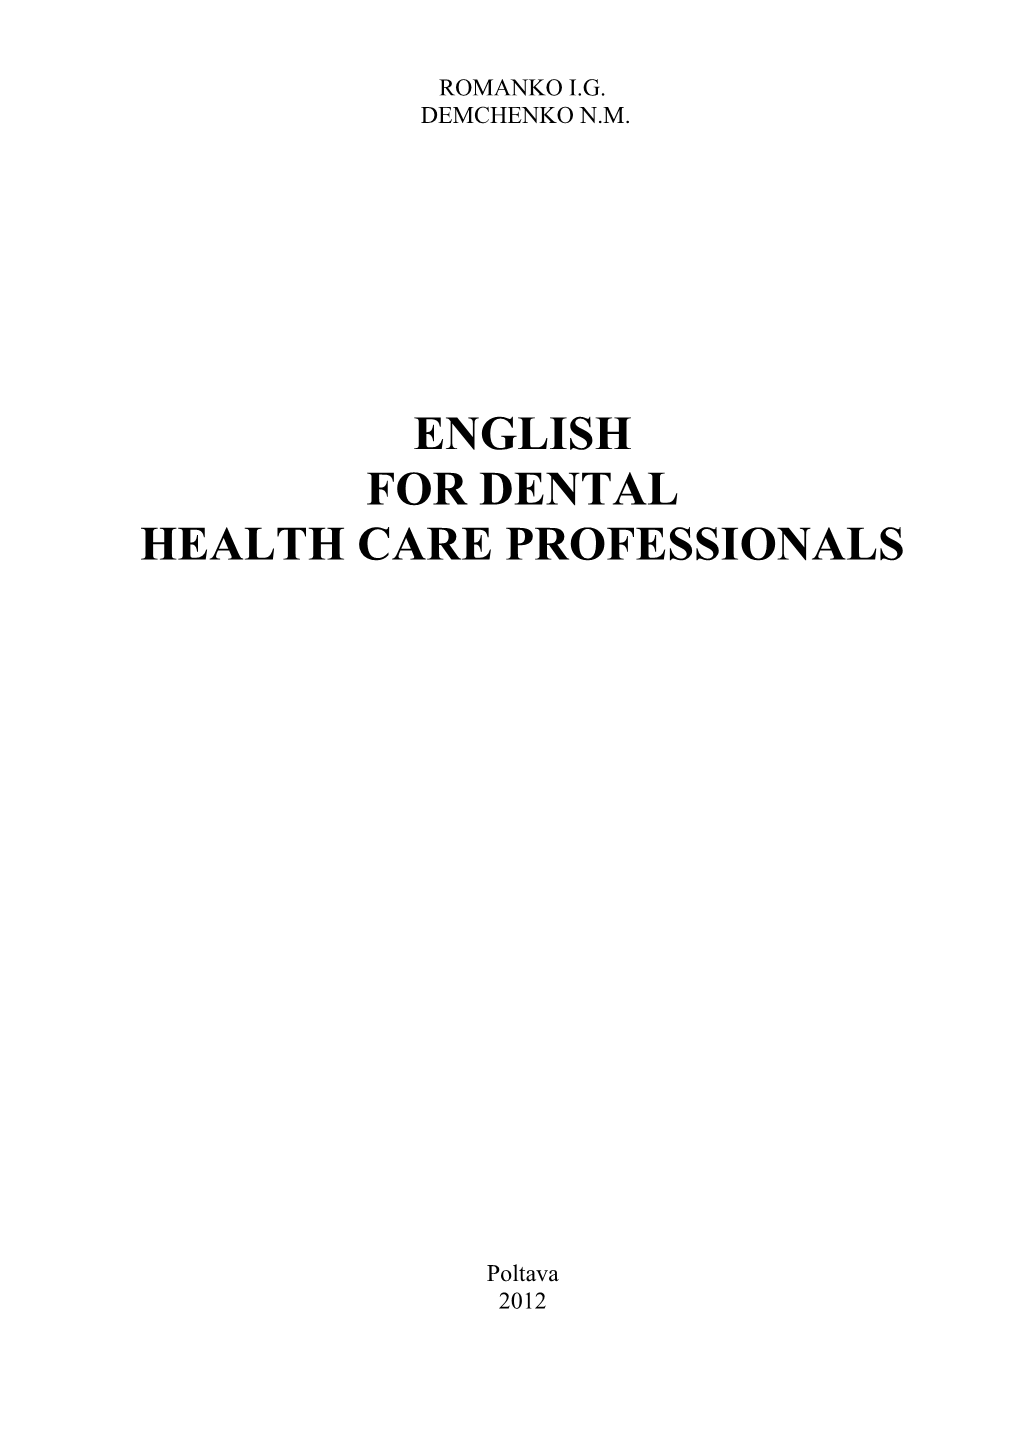 English for Dental Health Care Professionals